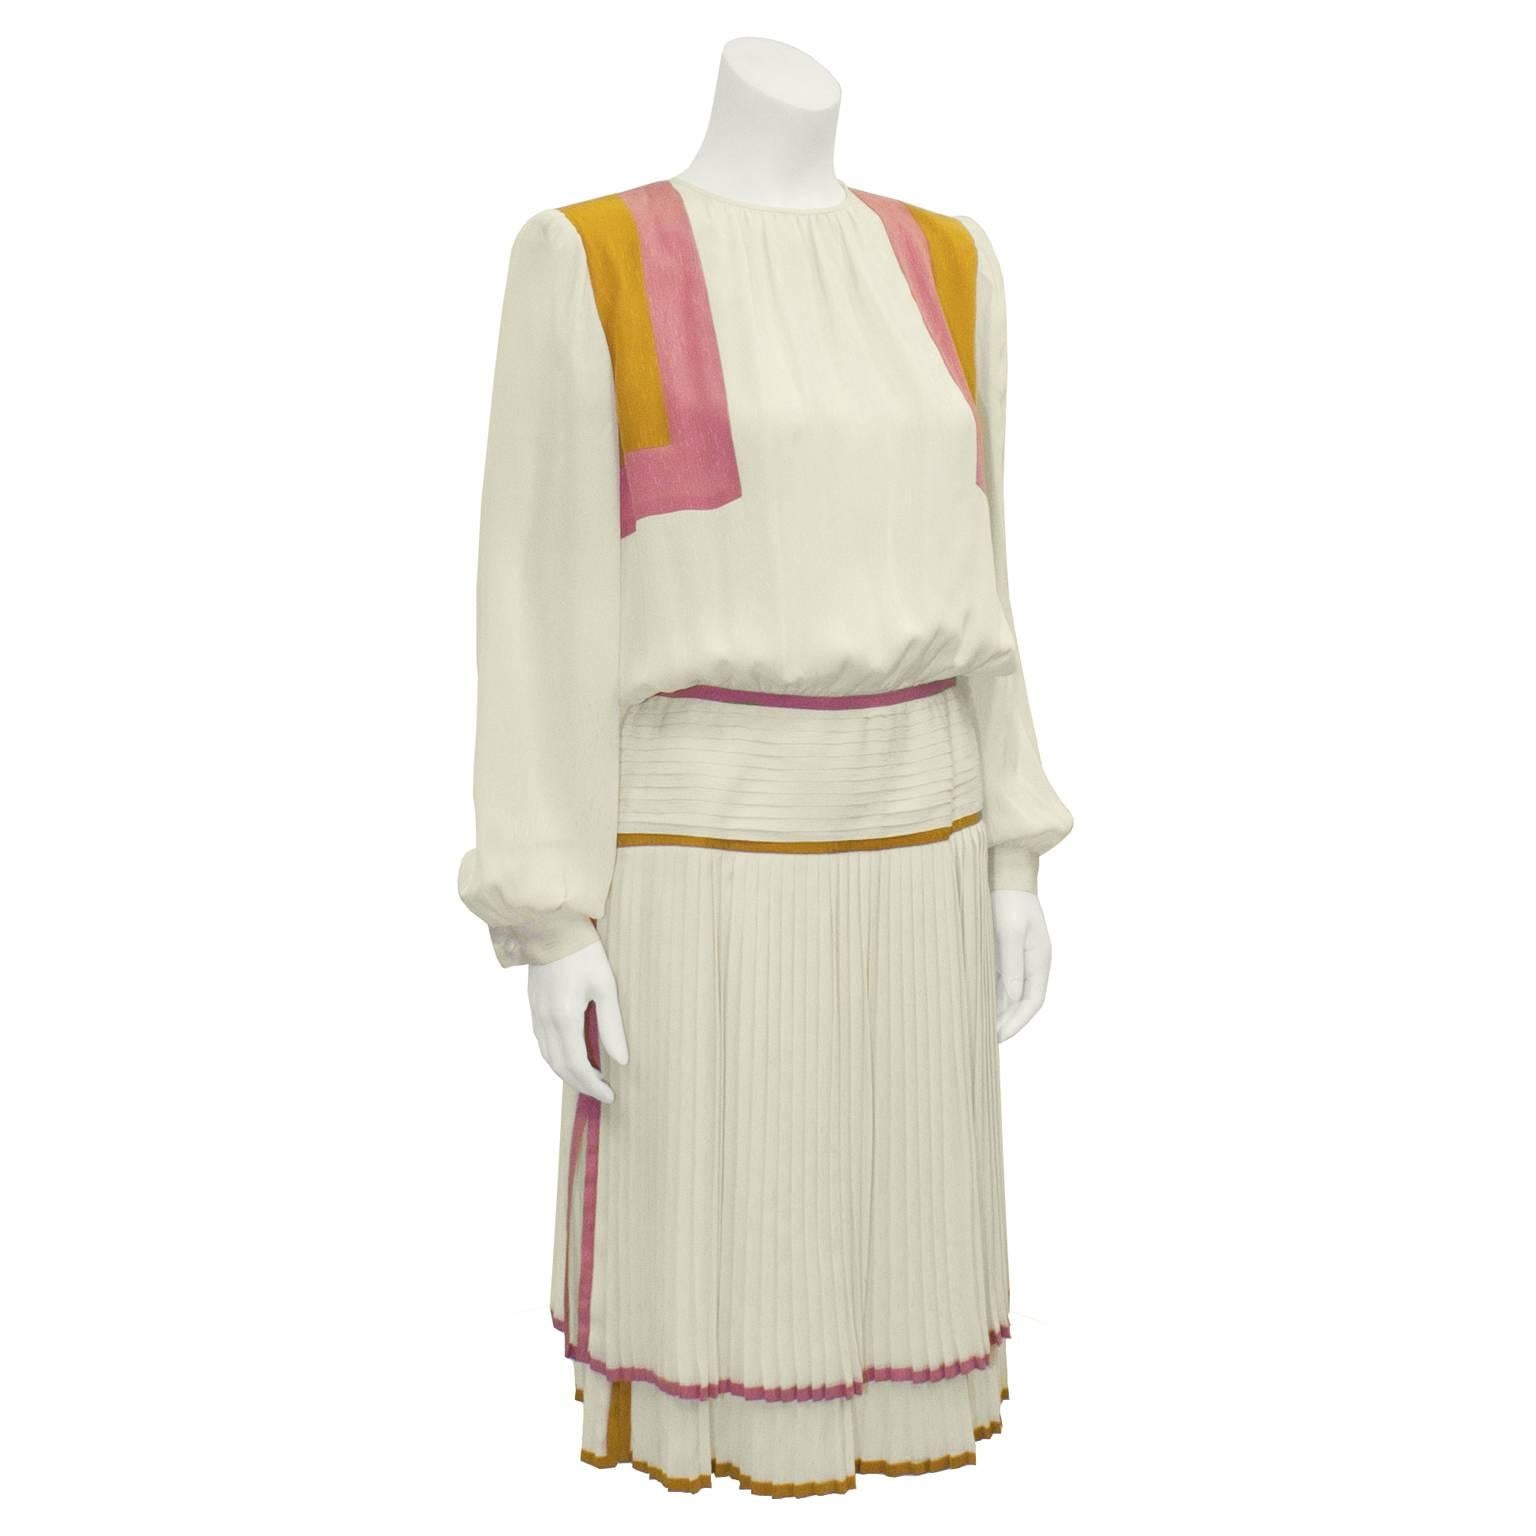 1980's Valentino silk jacquard dress with long sleeves and pleated skirt. A fabulous cream colored silk piece, with pink and mustard details. Slight gathering around jewel cut neck. Softly padded shoulders with loose fitting sleeves, and cuffed